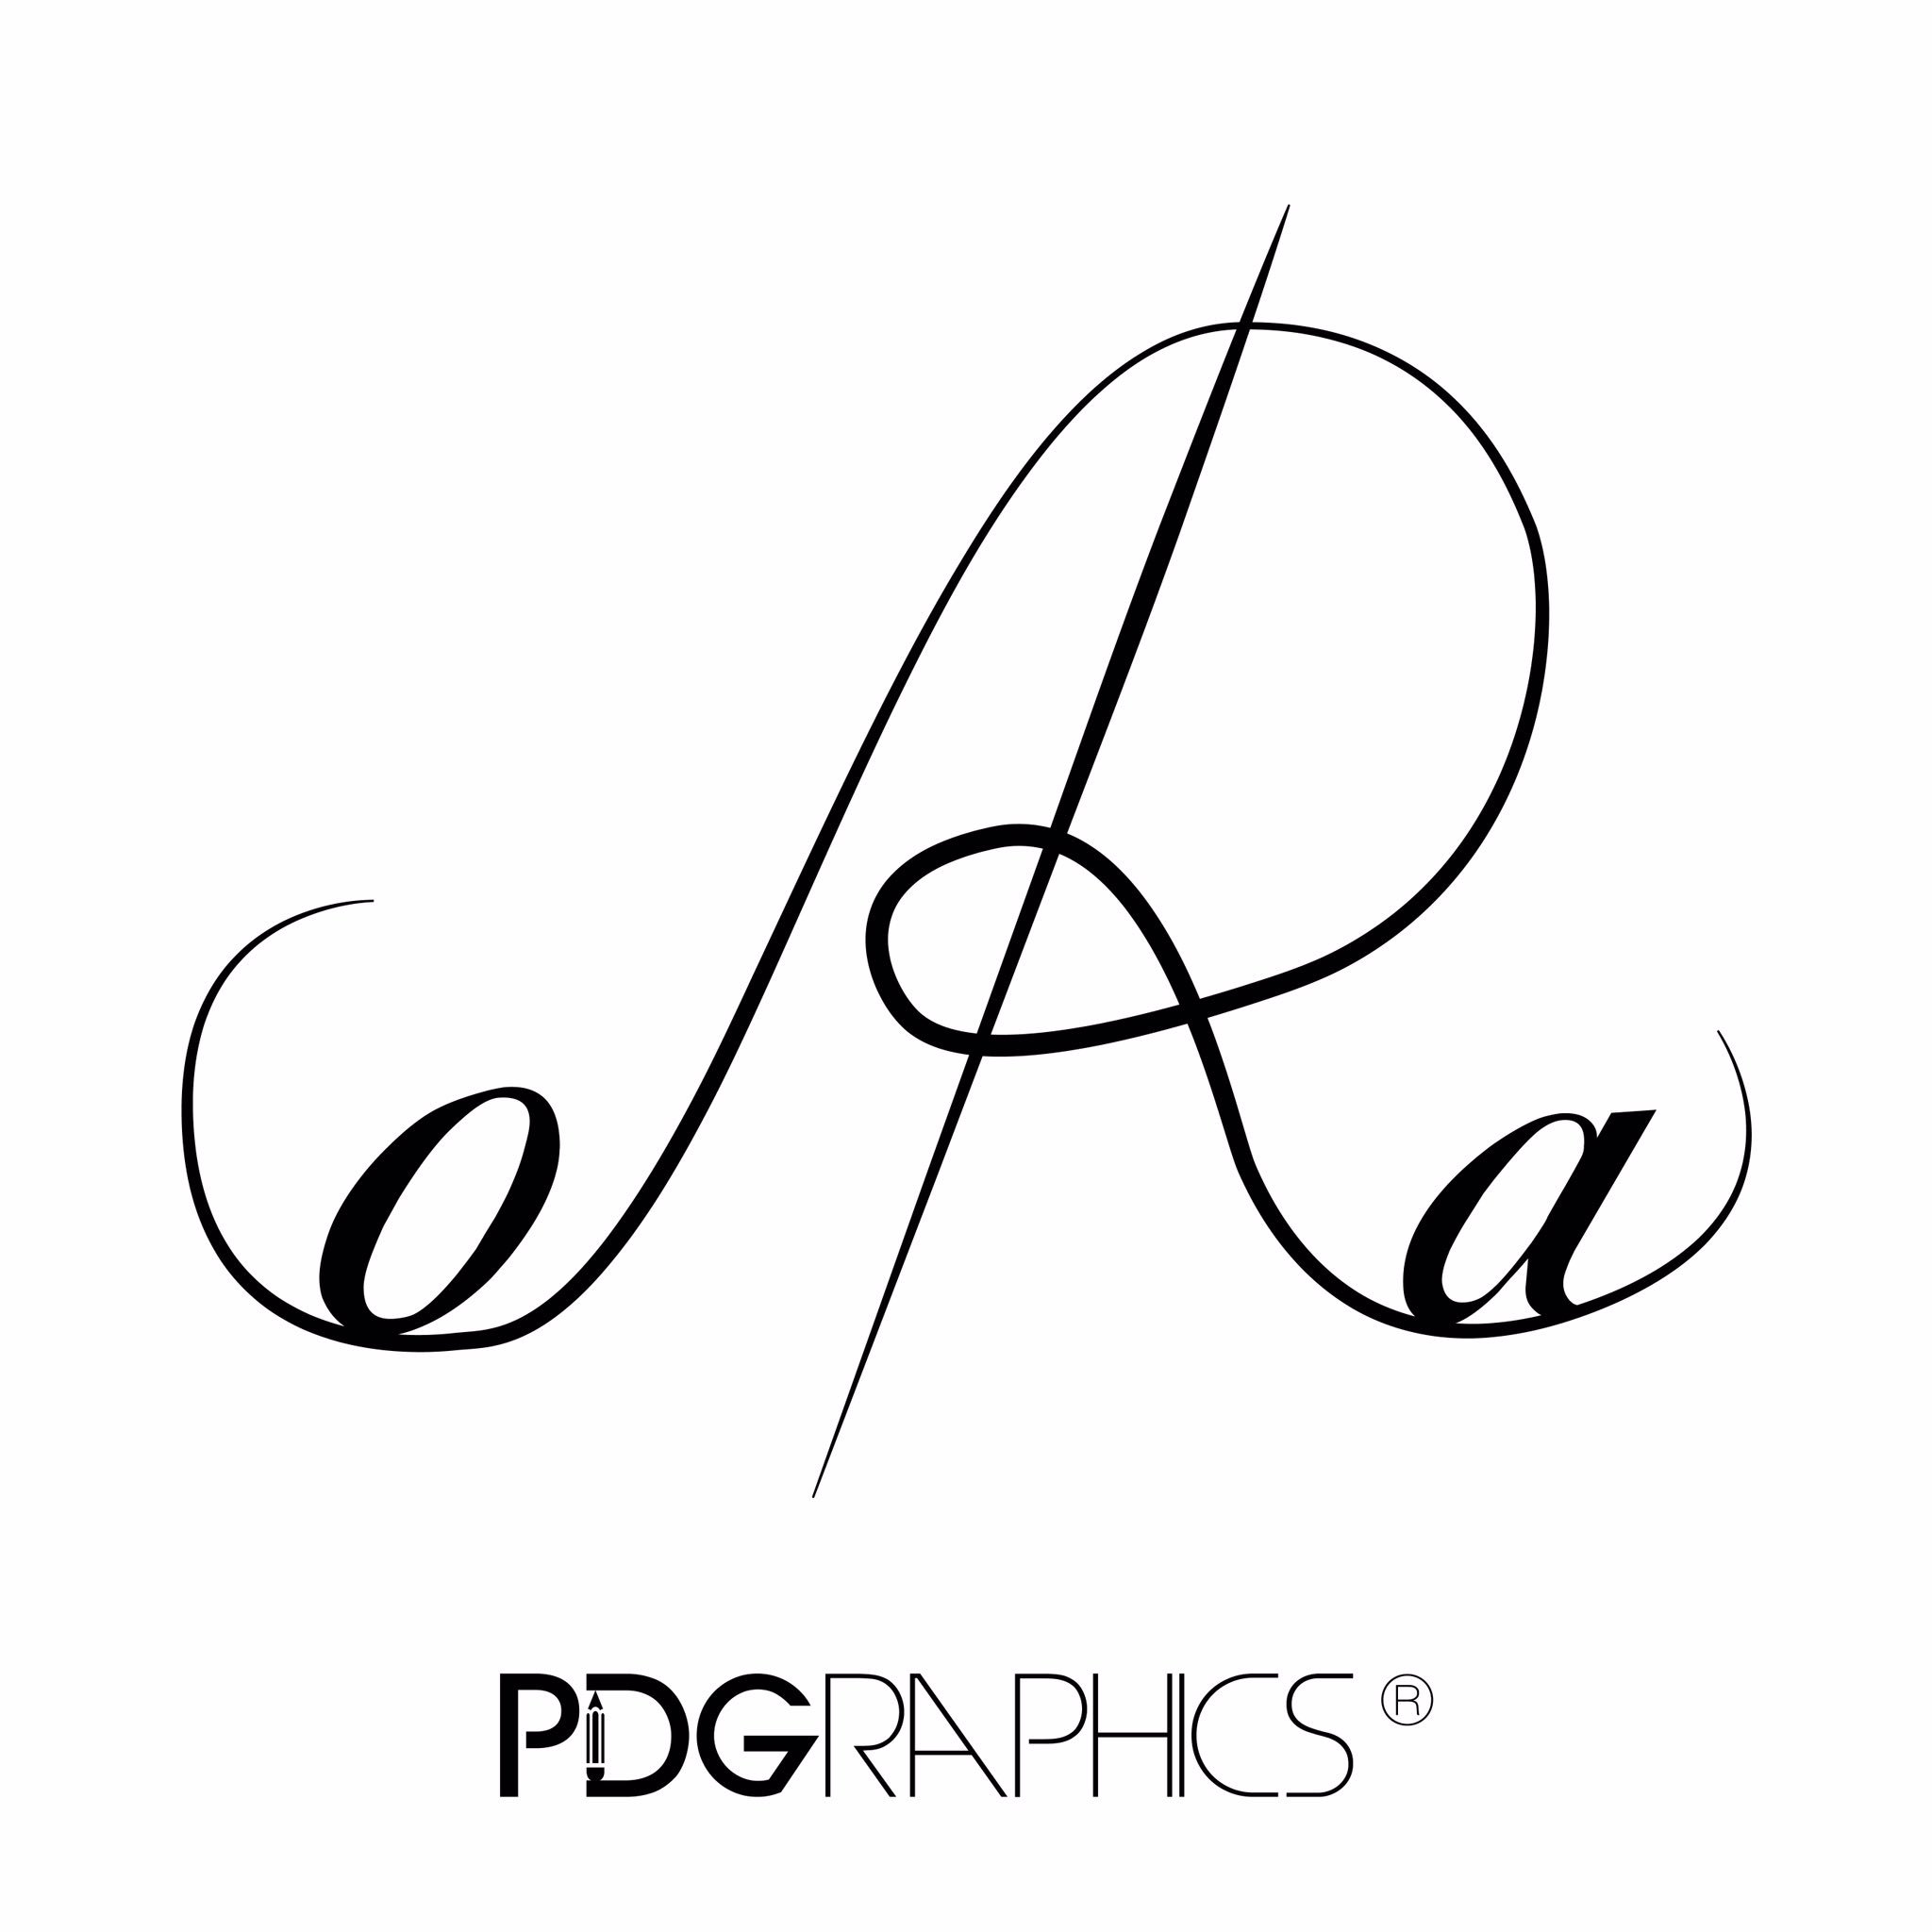 Wedding Monogram White Transparent, Collection Of Elegant Wedding  Monograms, Frame, Collection, Wedding PNG Image For Free Download